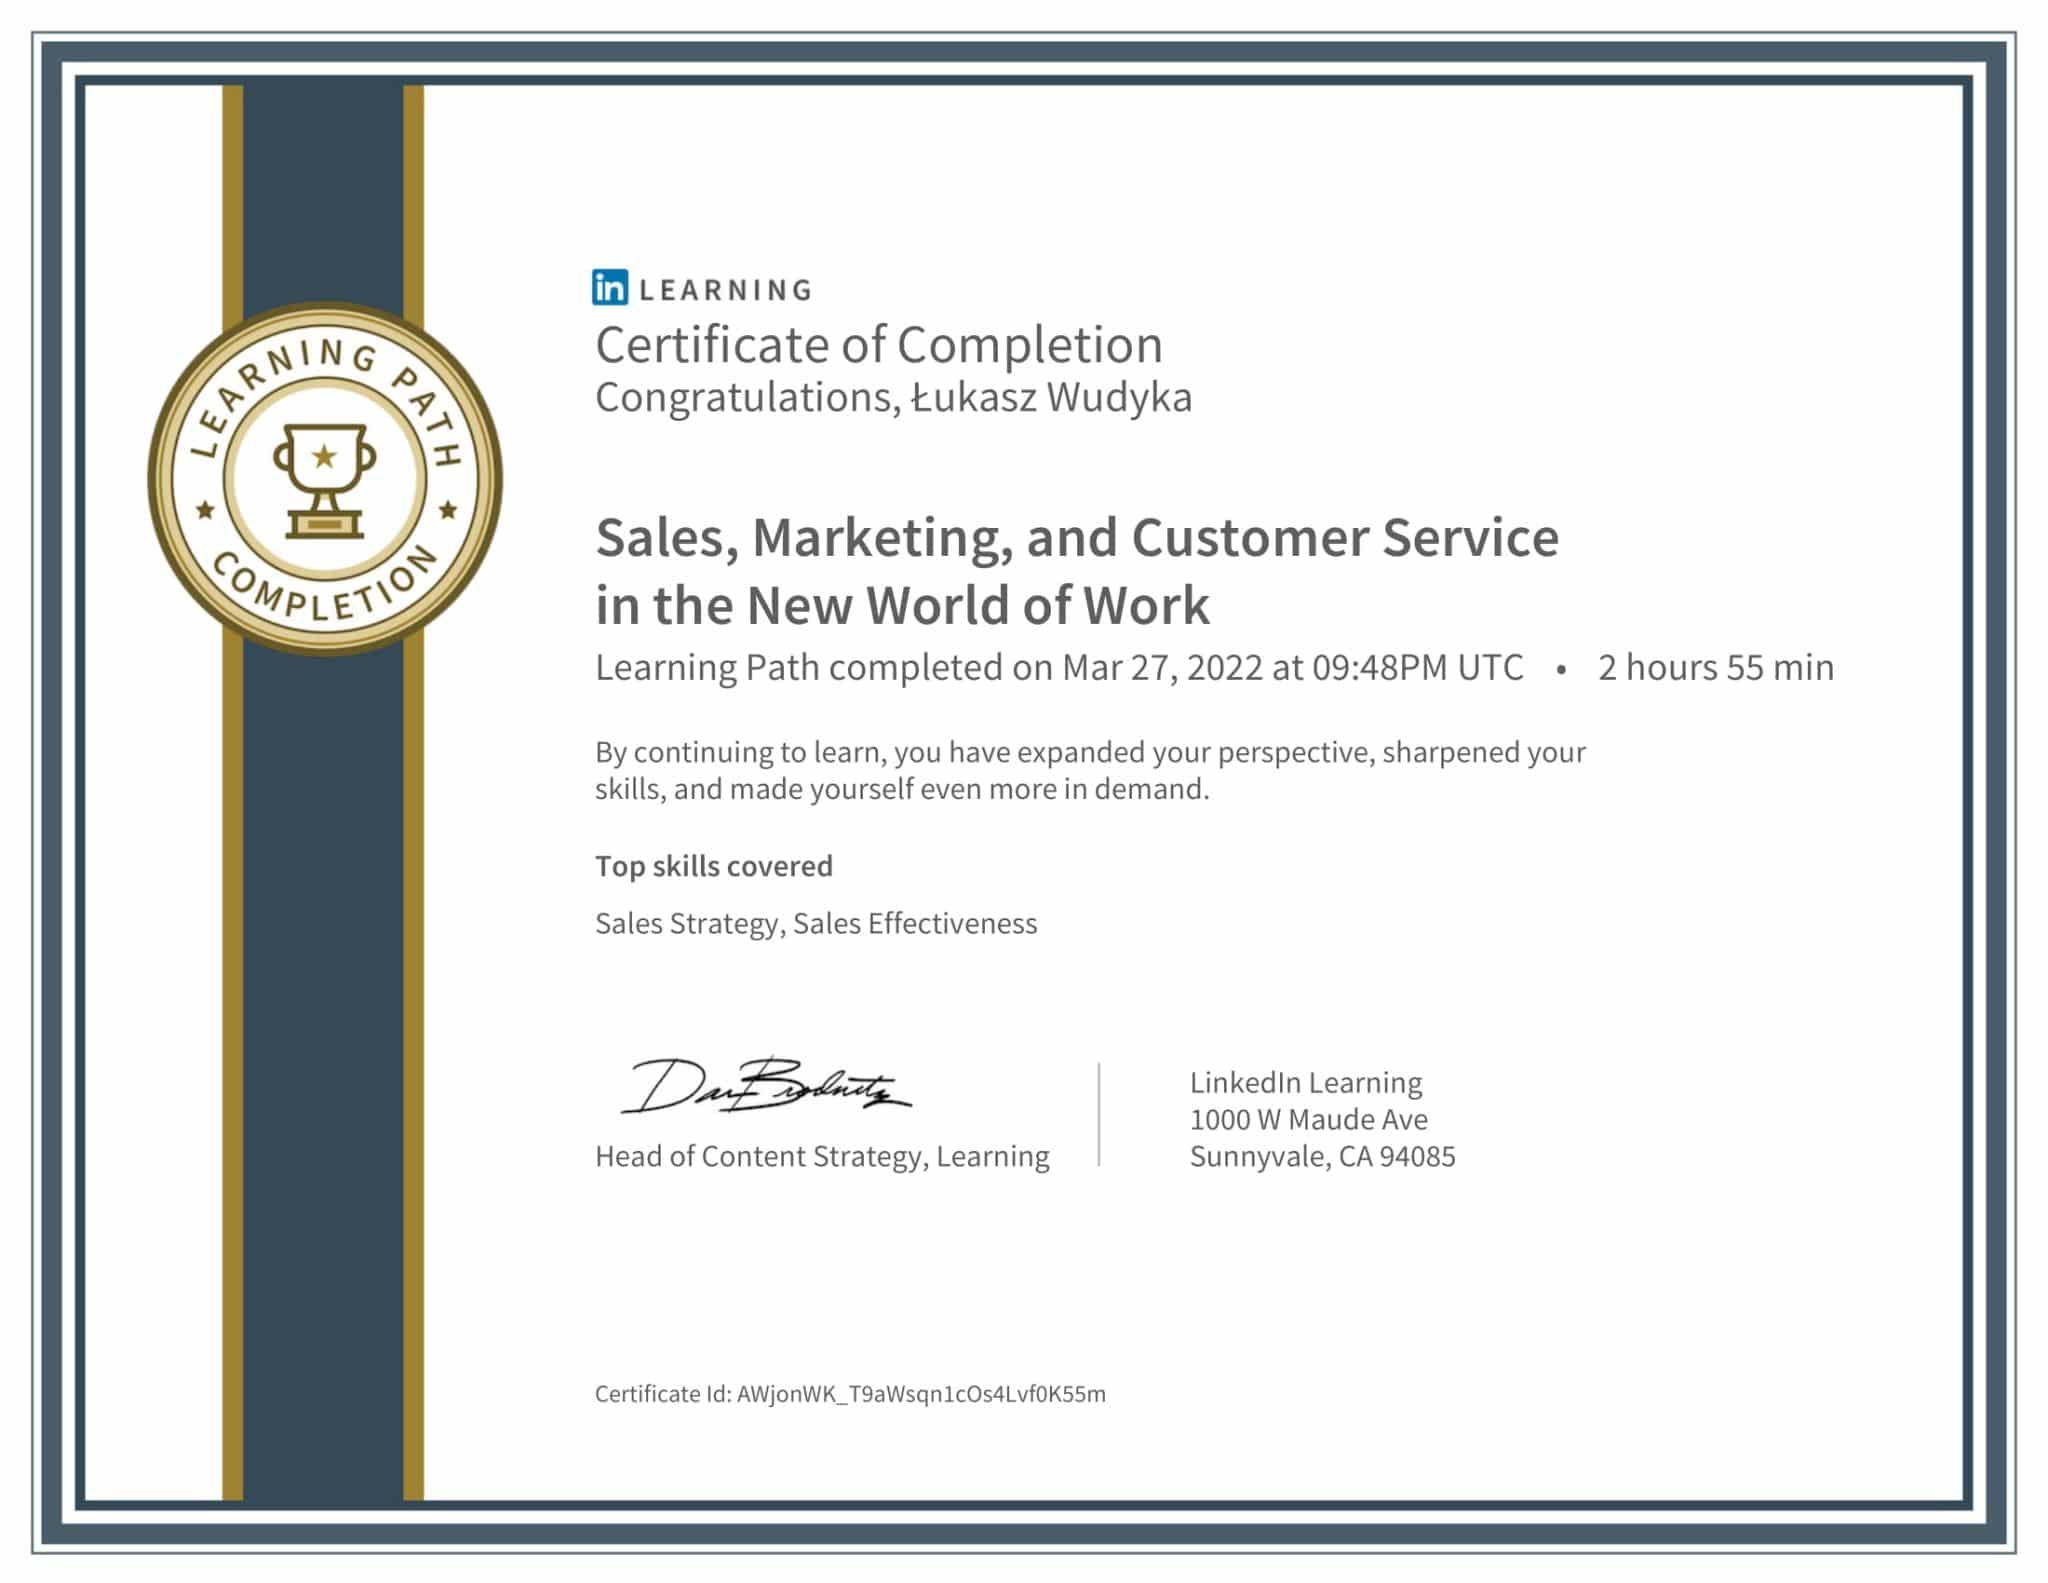 CertificateOfCompletion_Sales Marketing and Customer Service in the New World of Work-1